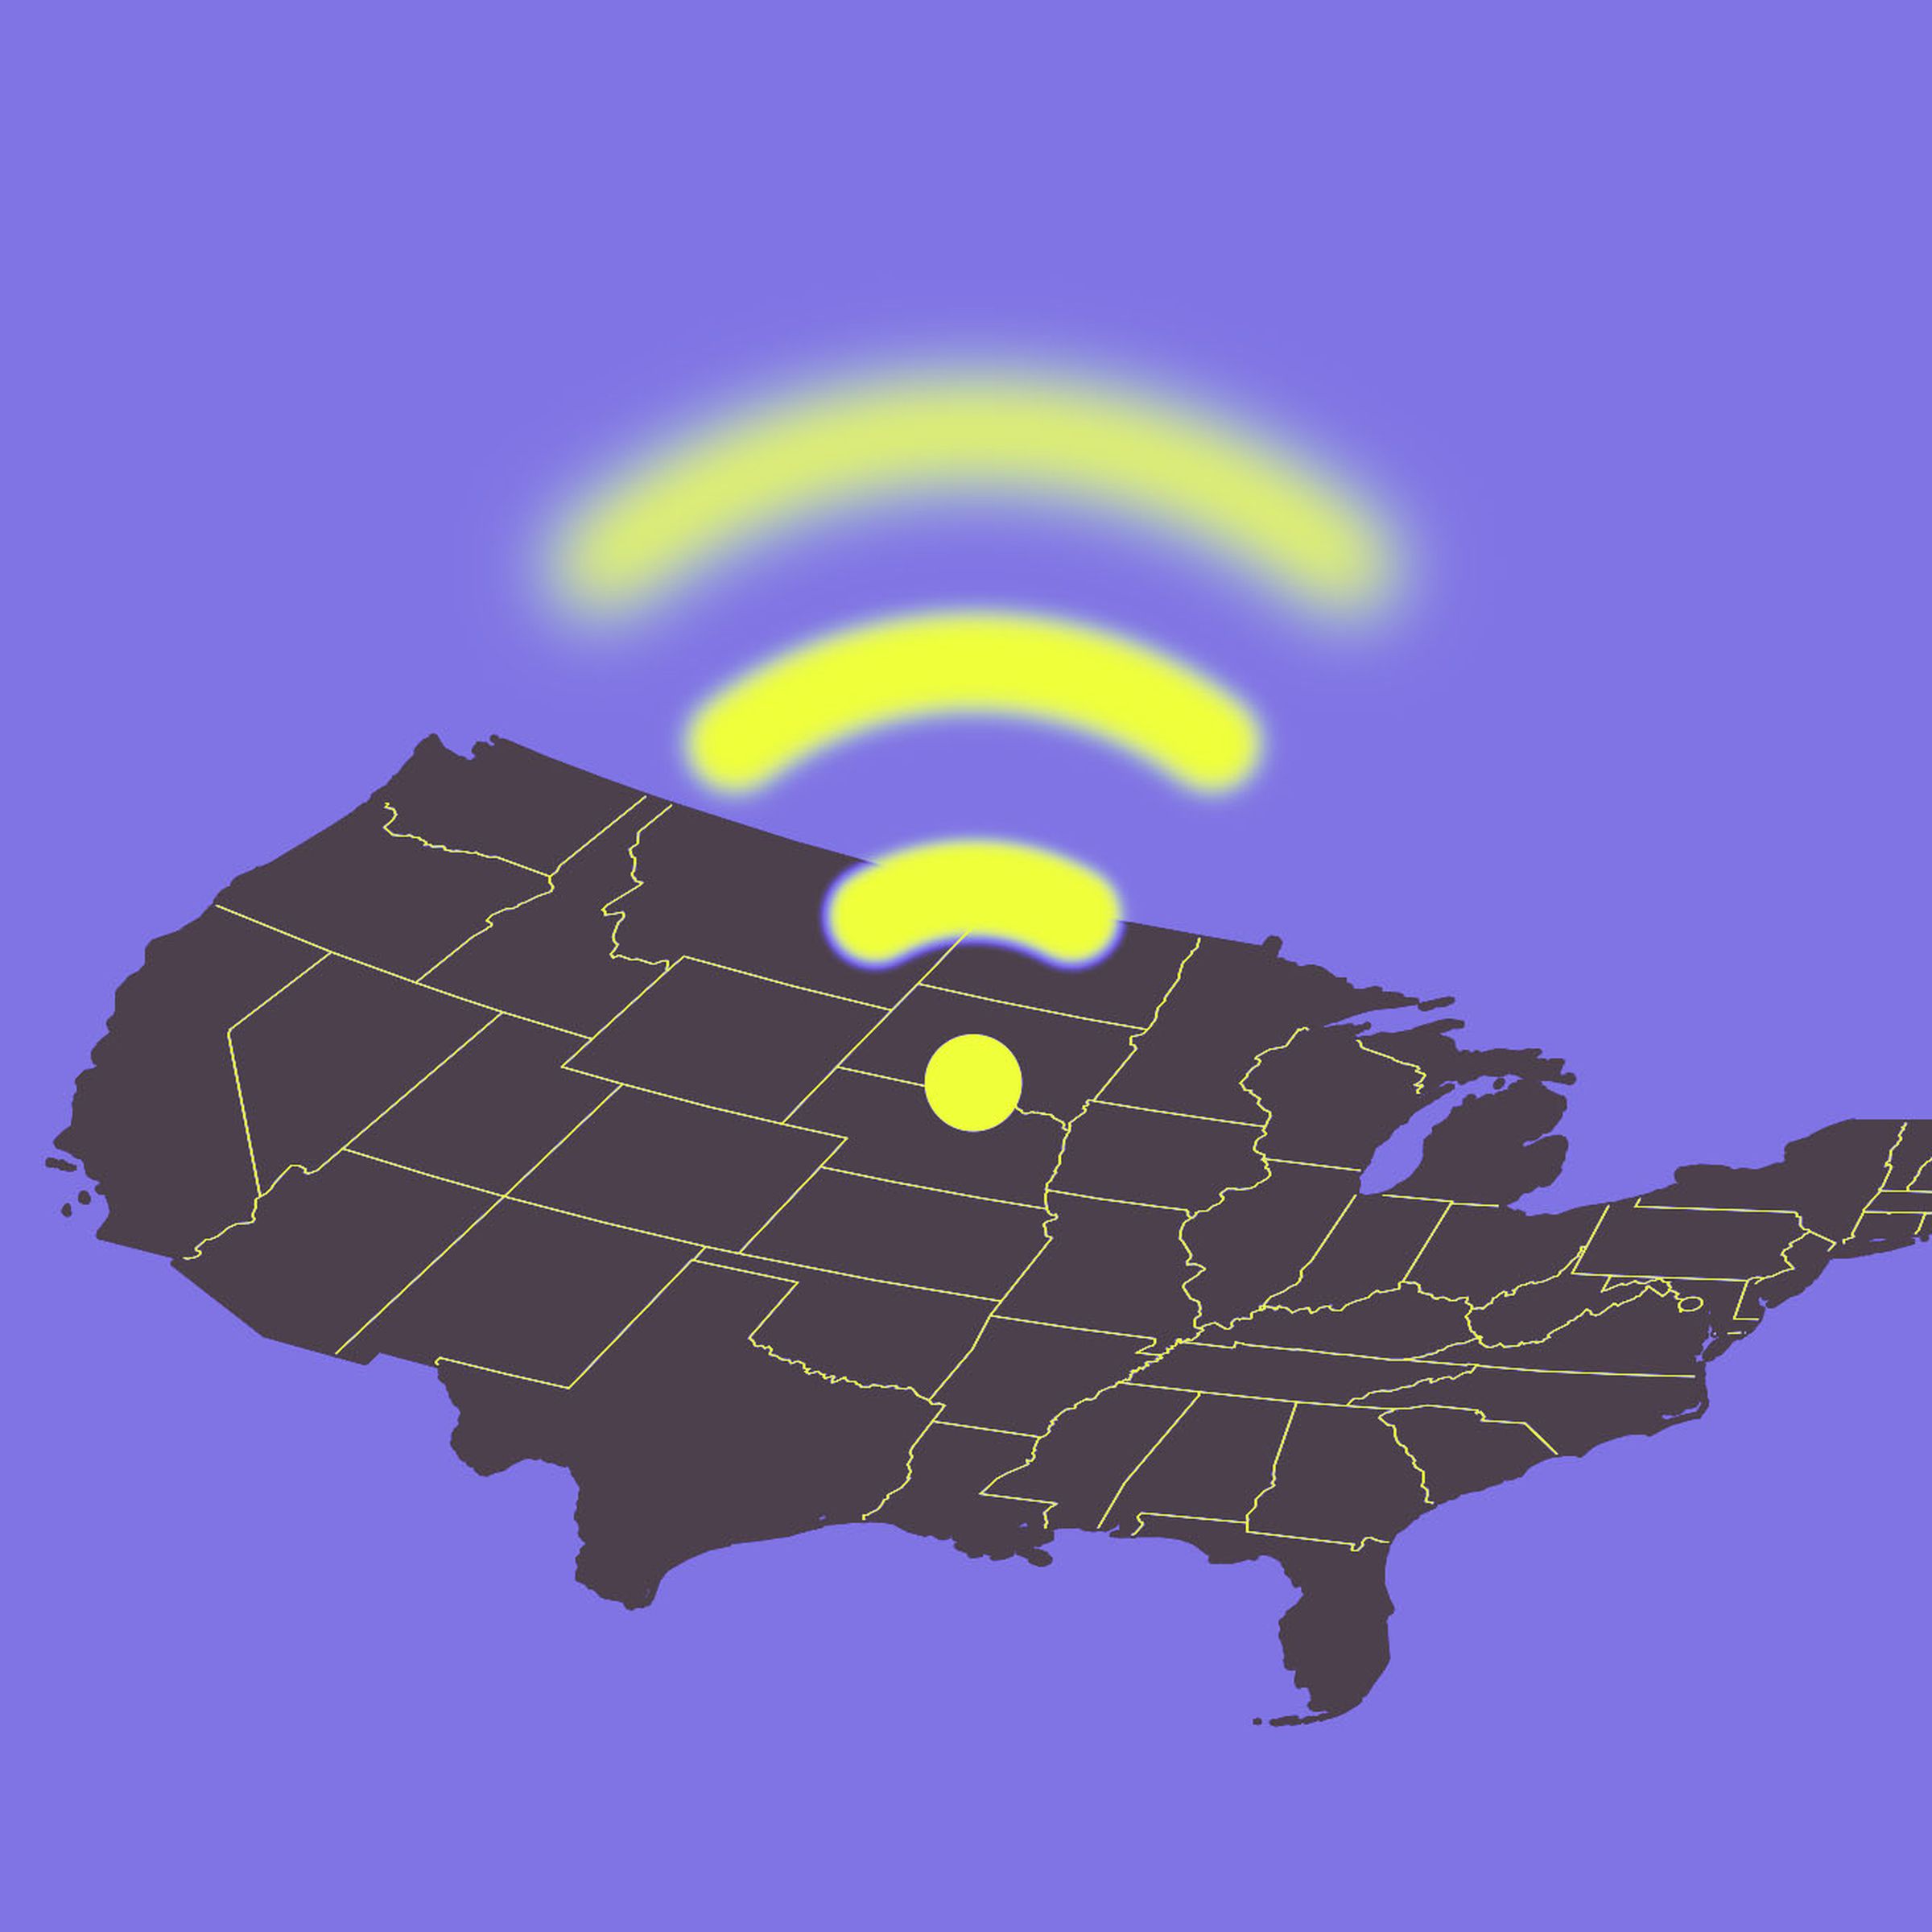 A fading Wi-Fi symbol above the United States.